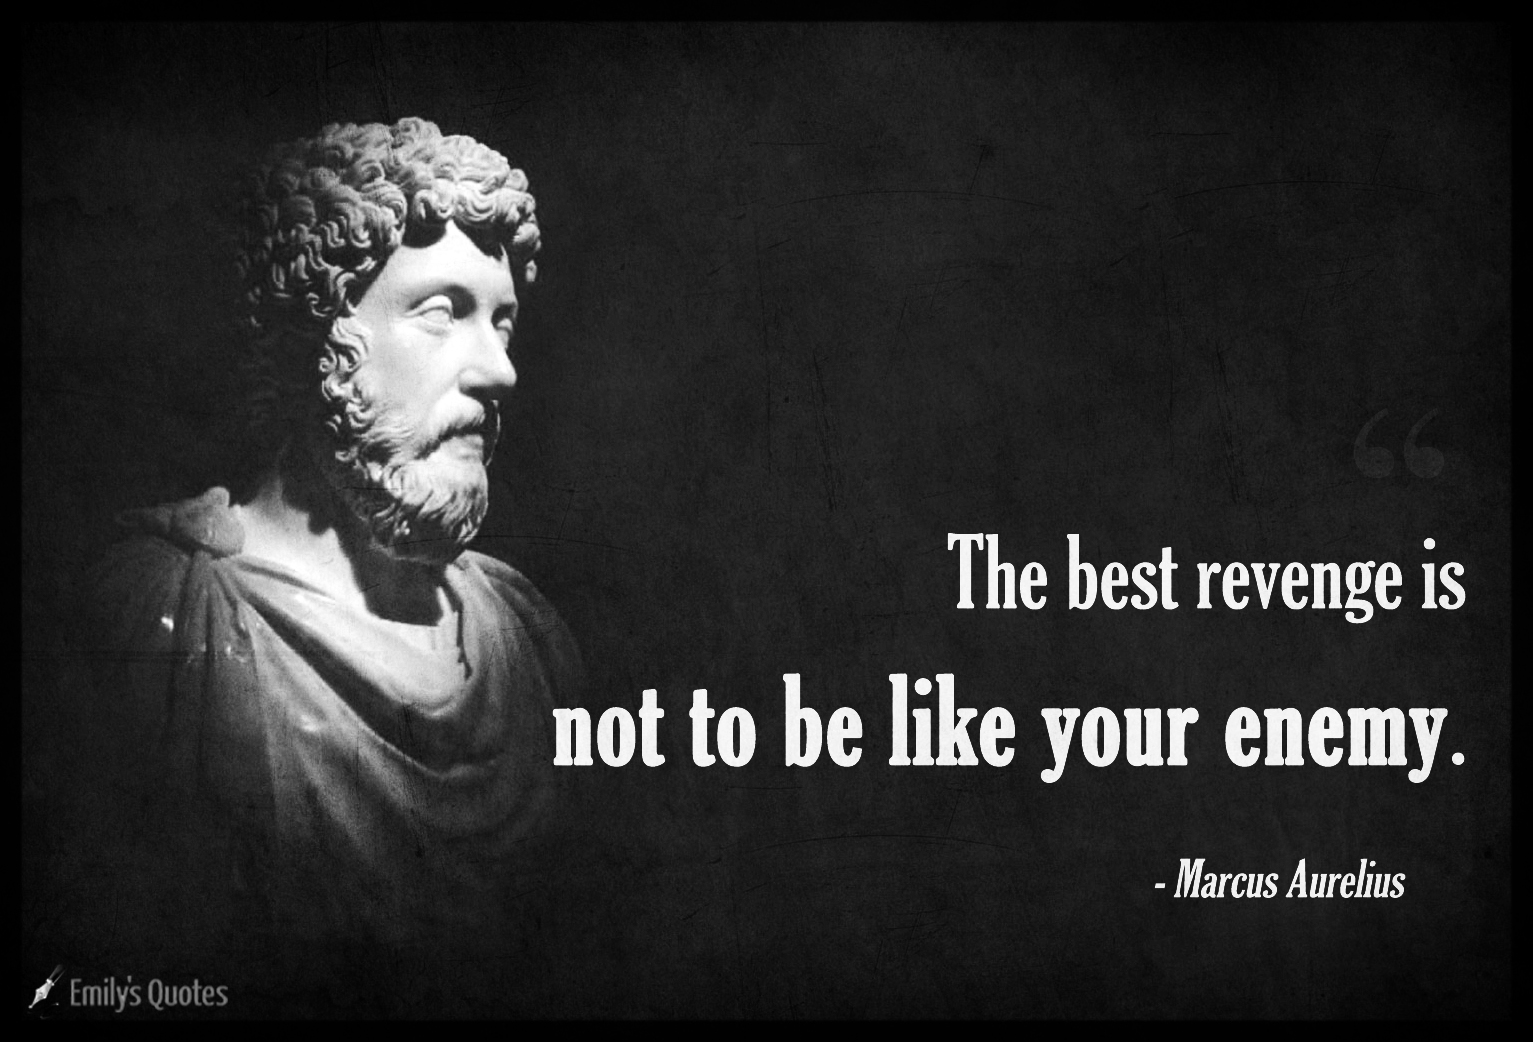 The best revenge is not to be like your enemy | Popular inspirational